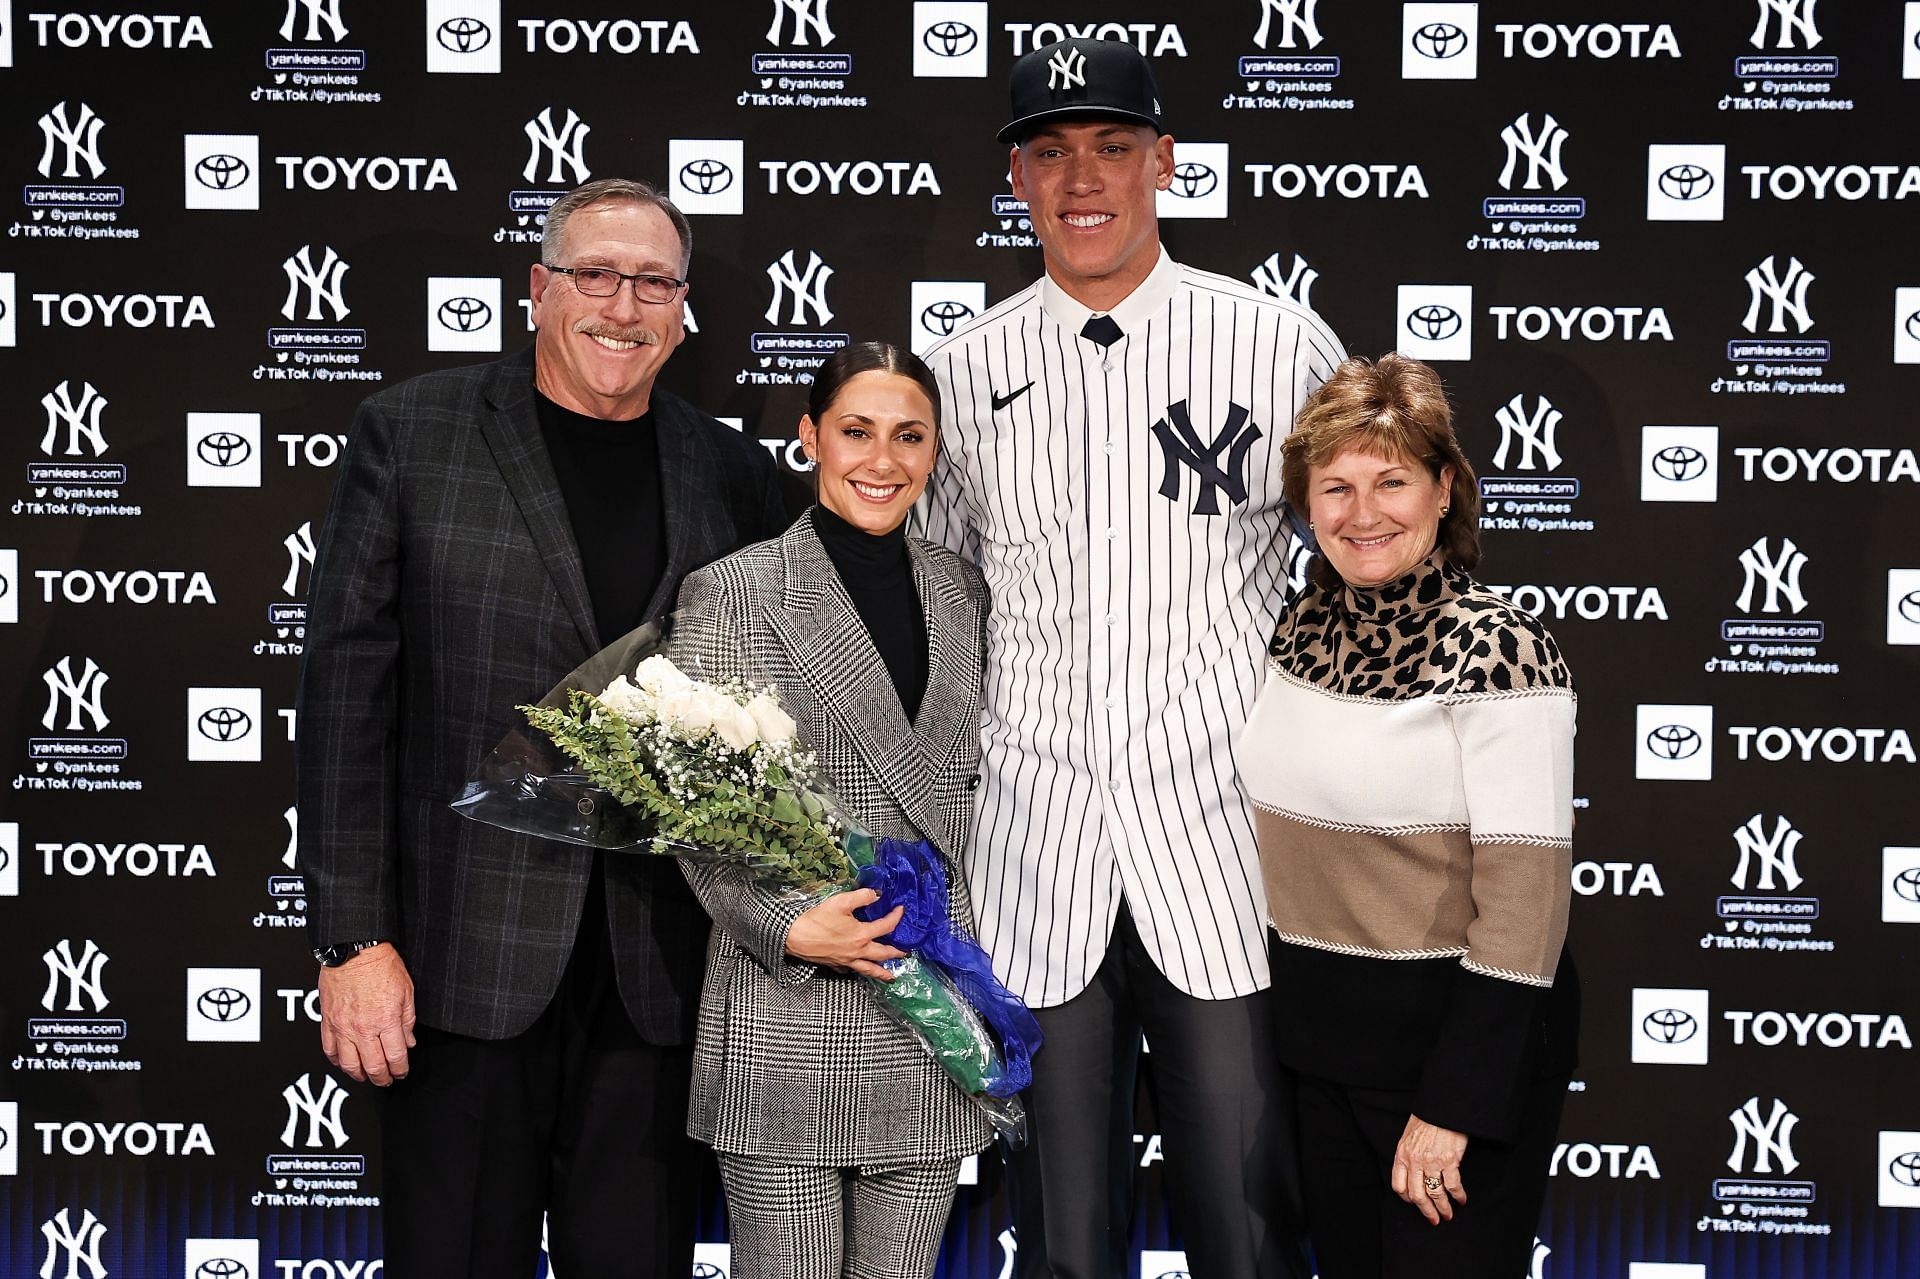 Aaron with his wife and parent at New York Yankees Press Conference.